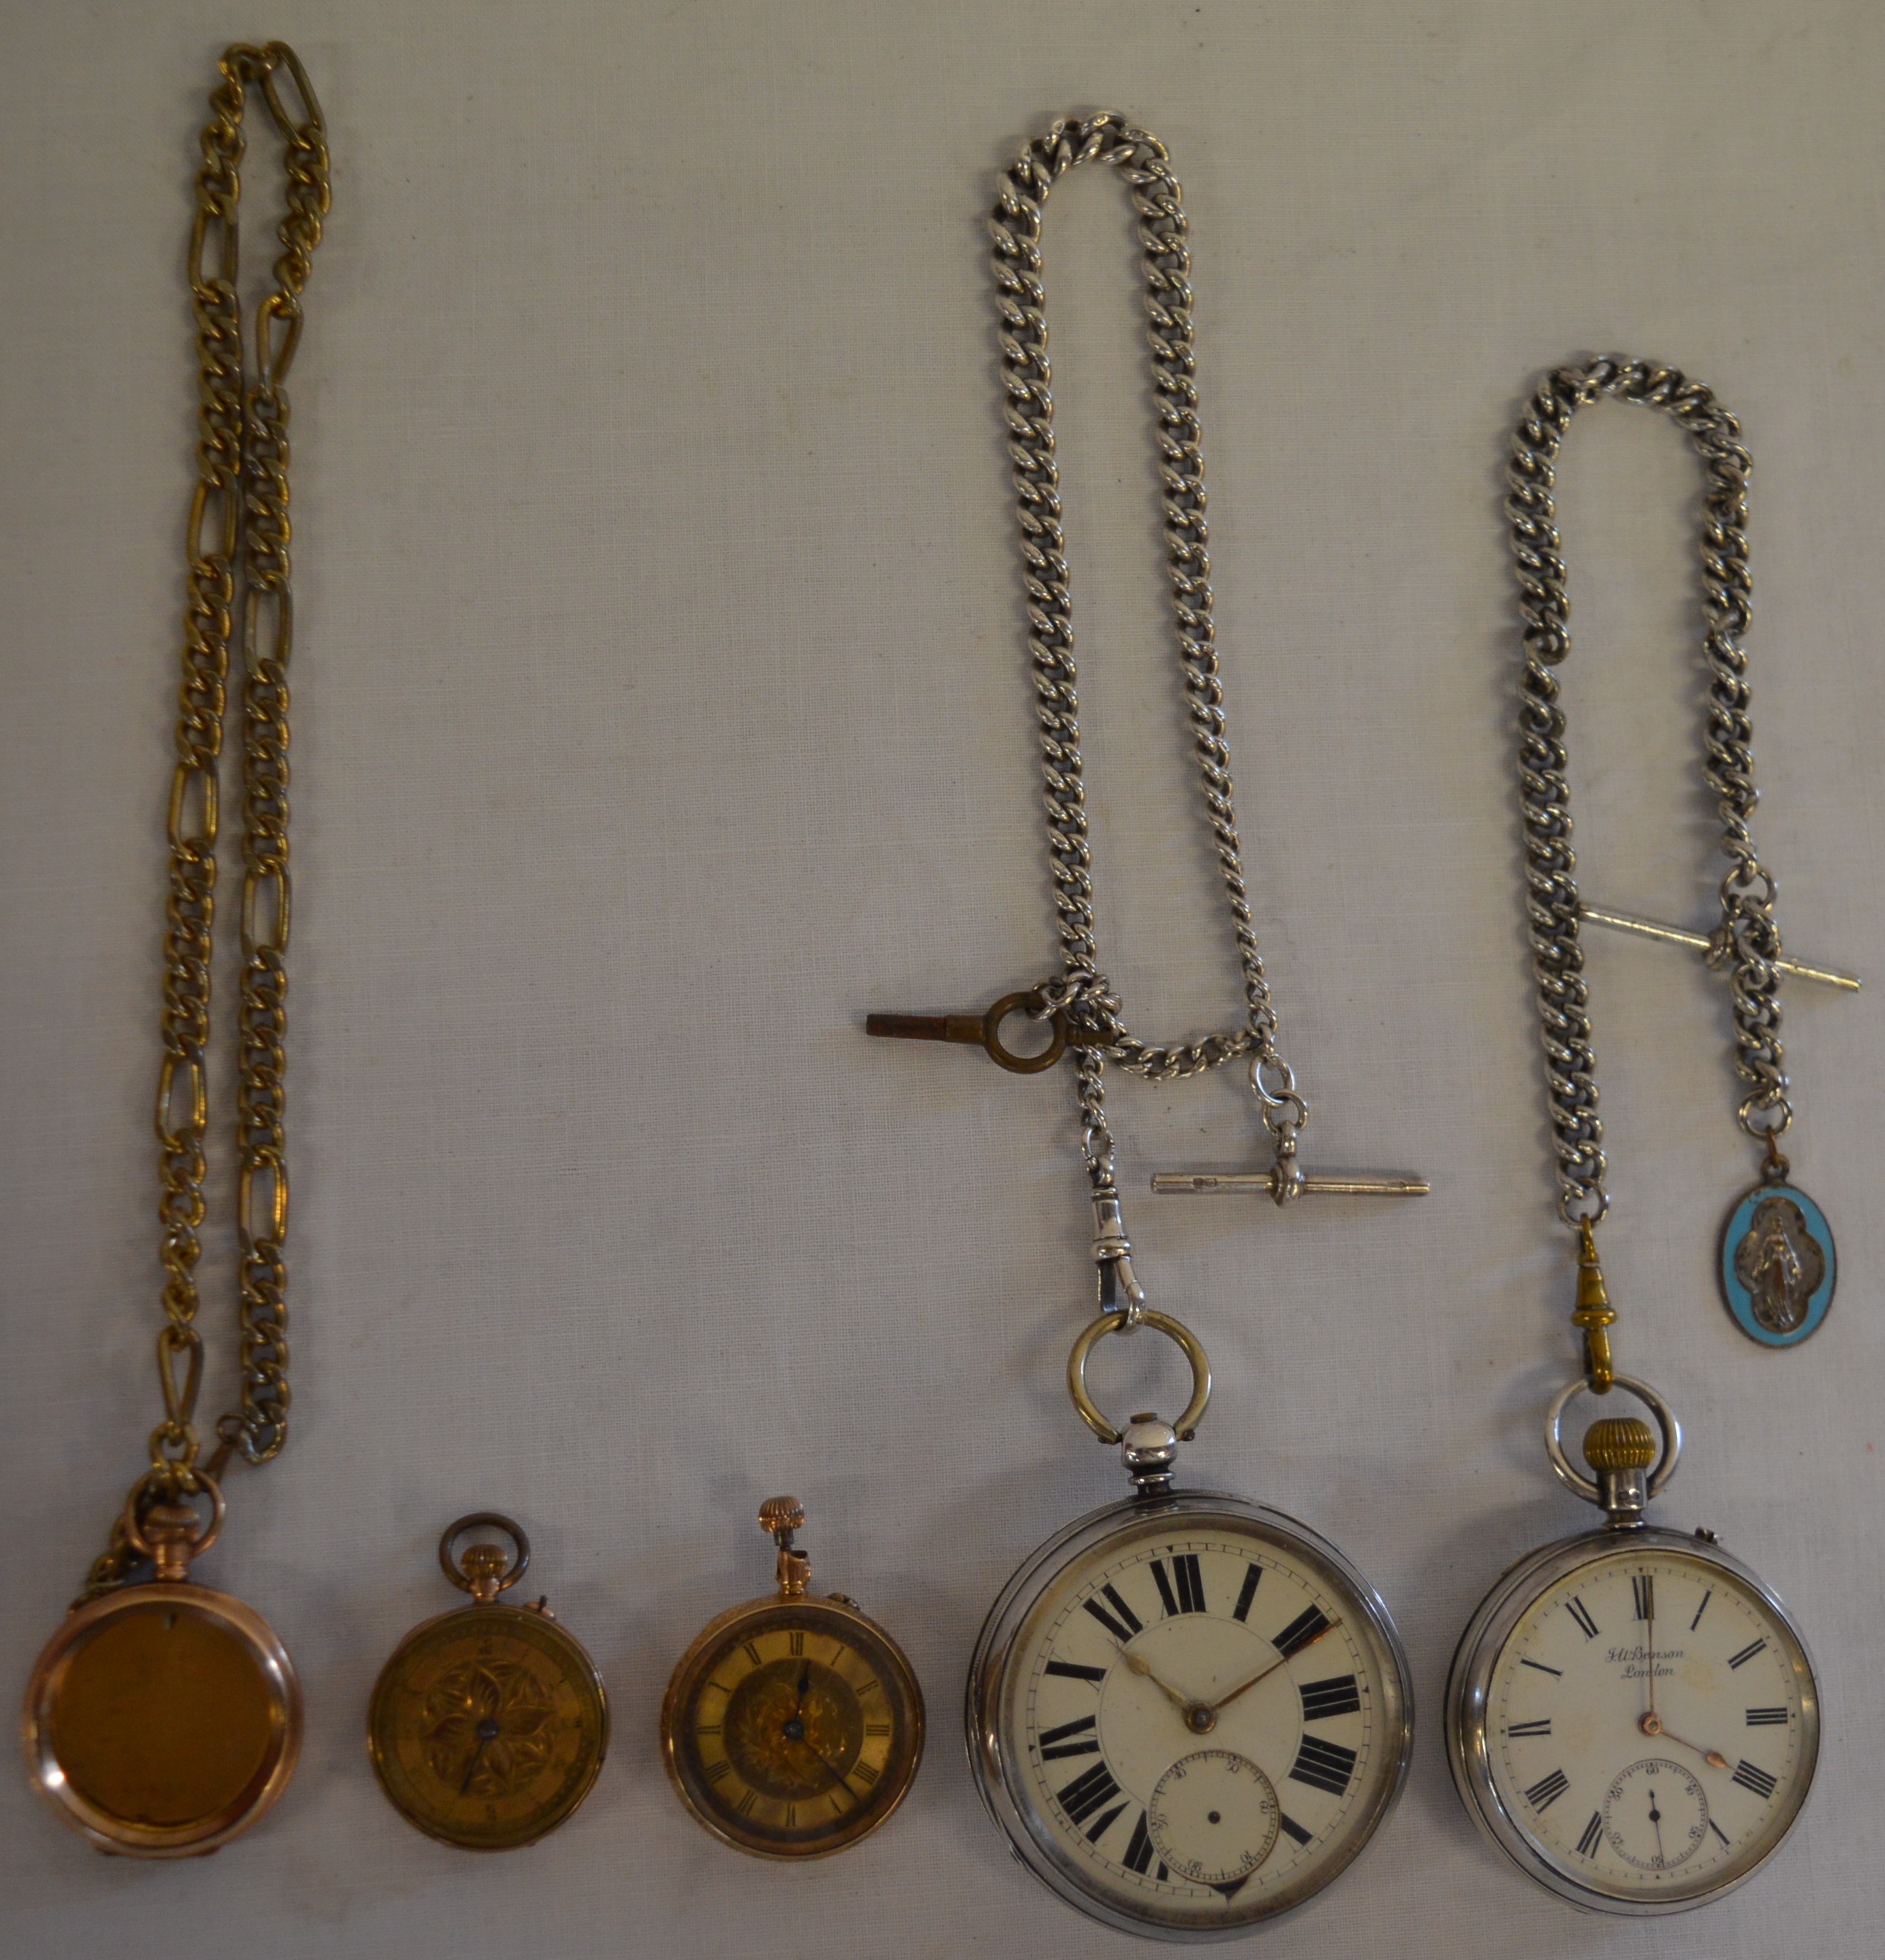 4 pocket watches in need of repair, including silver H V Benson London and another with engraved